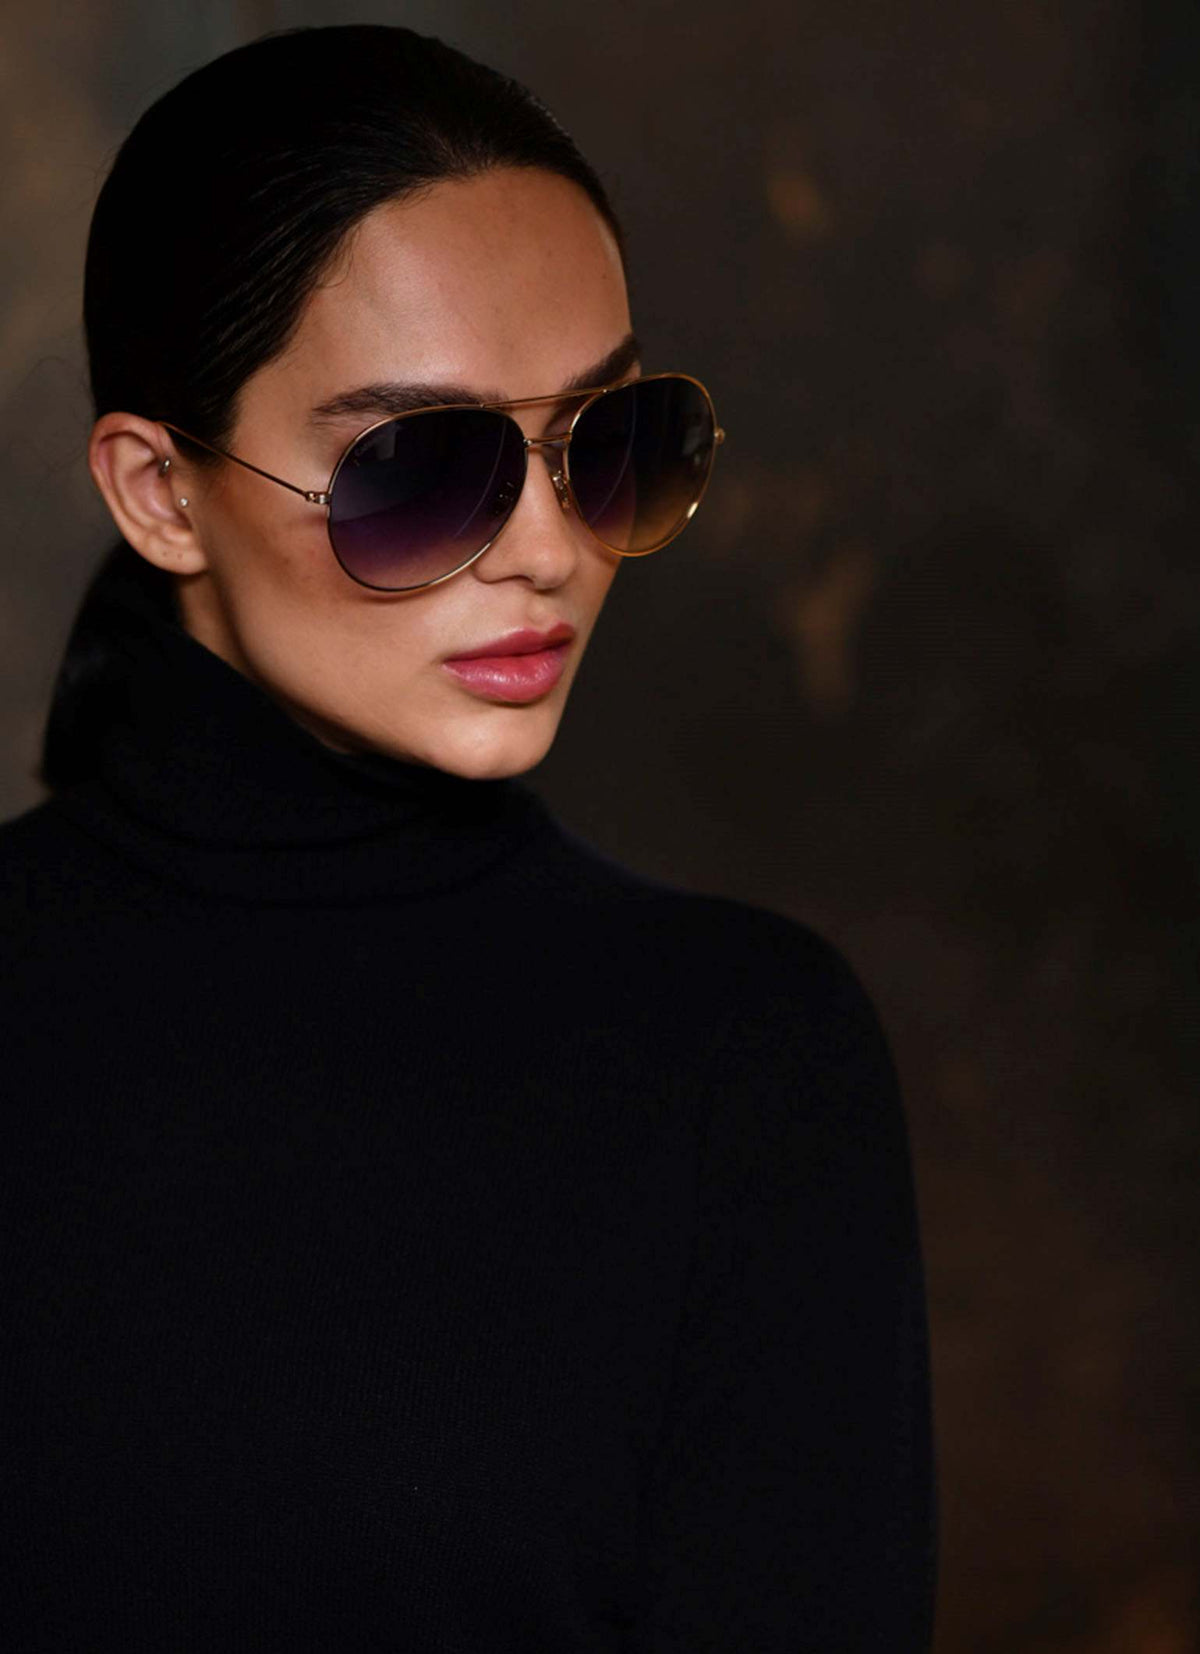 Turtle neck cashmere sweater made in Italy with sunglasses in black lenses and gold frame